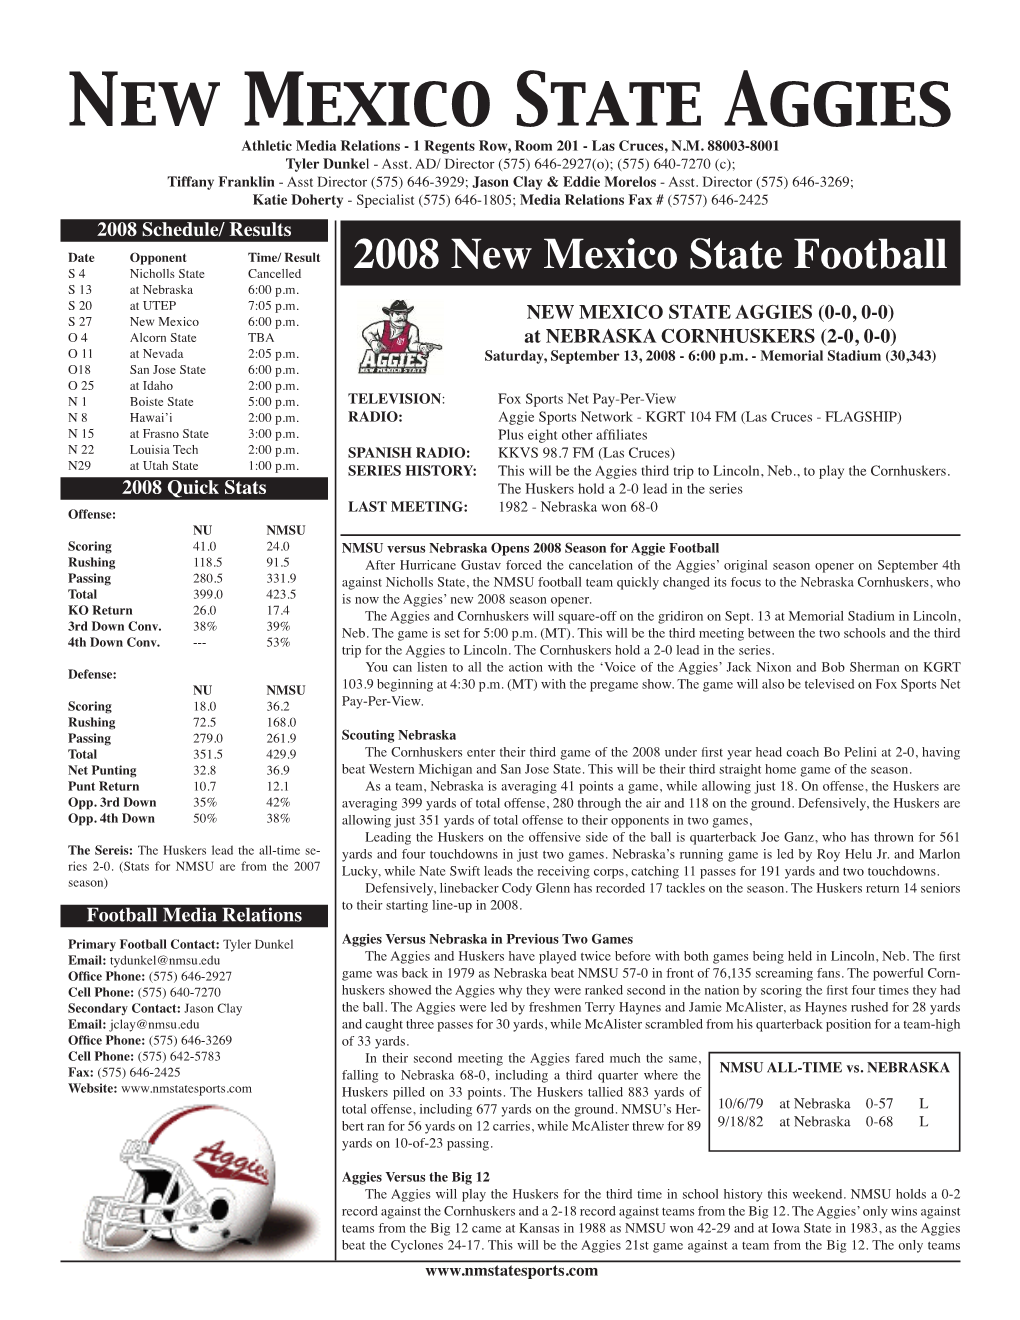 New Mexico State Aggies Athletic Media Relations - 1 Regents Row, Room 201 - Las Cruces, N.M